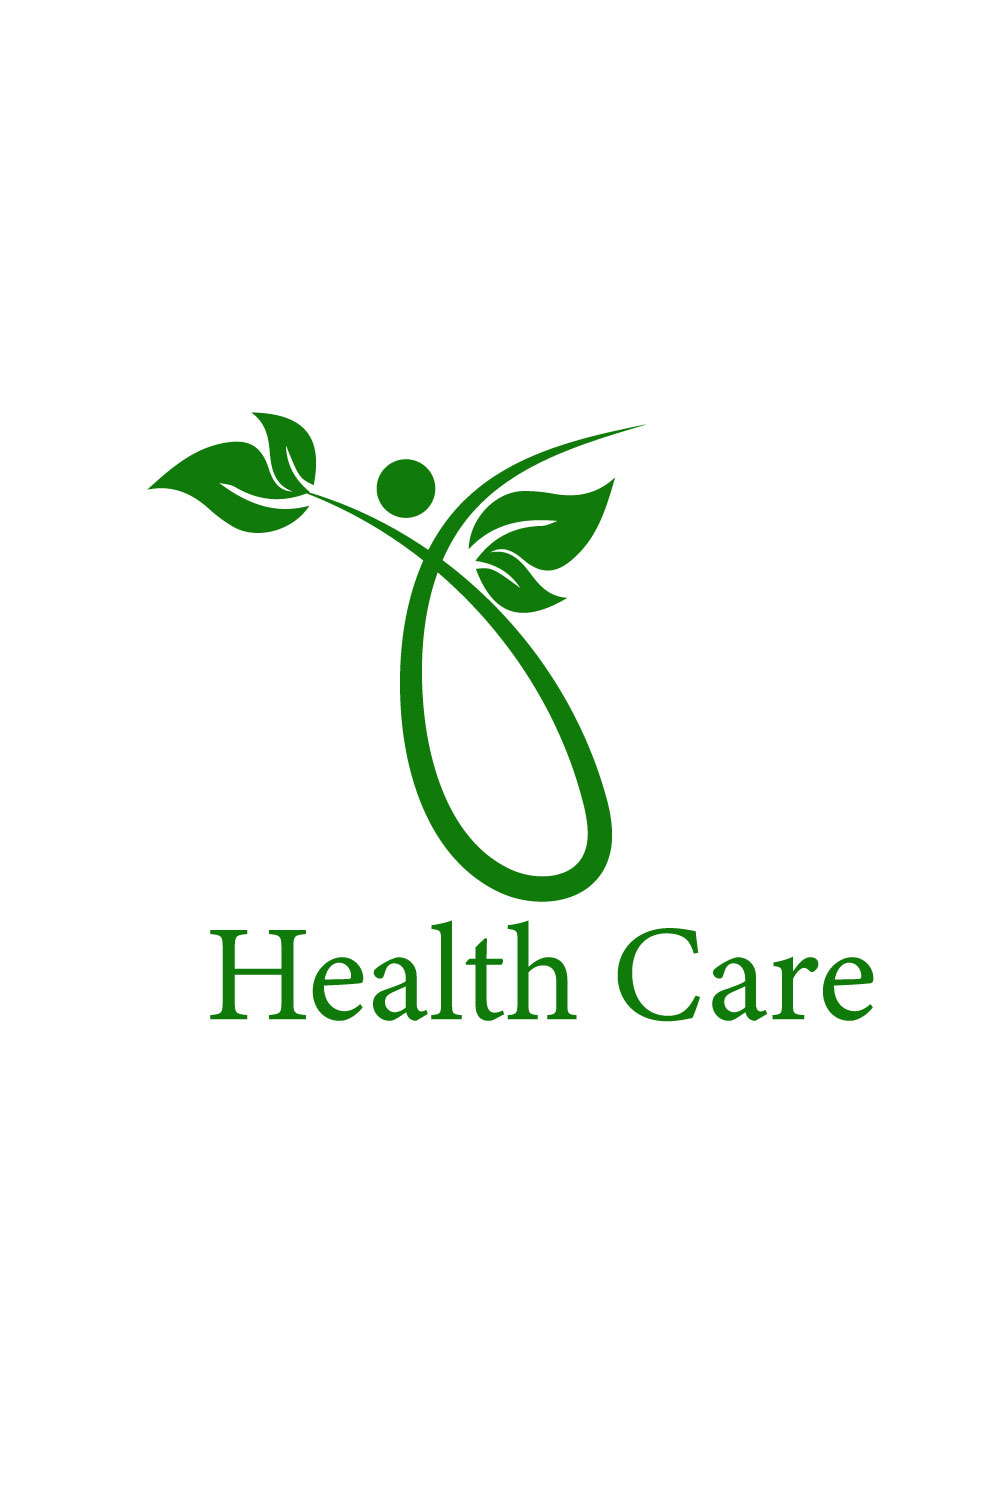 Free Medical Health logo pinterest preview image.